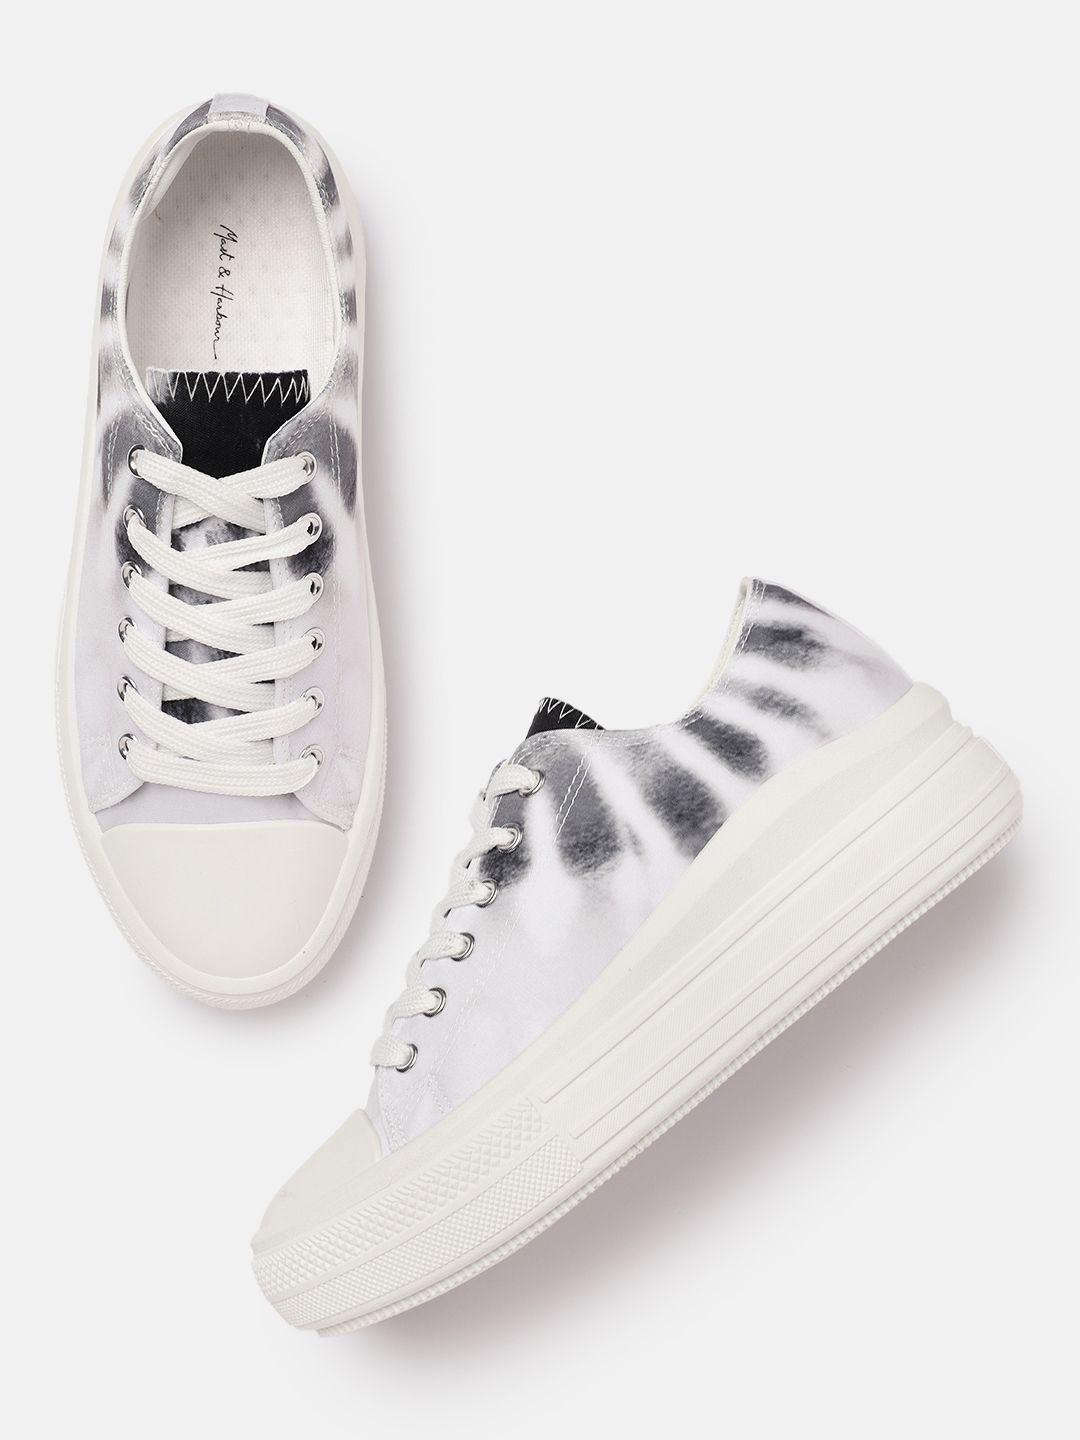 mast & harbour women white printed sneakers